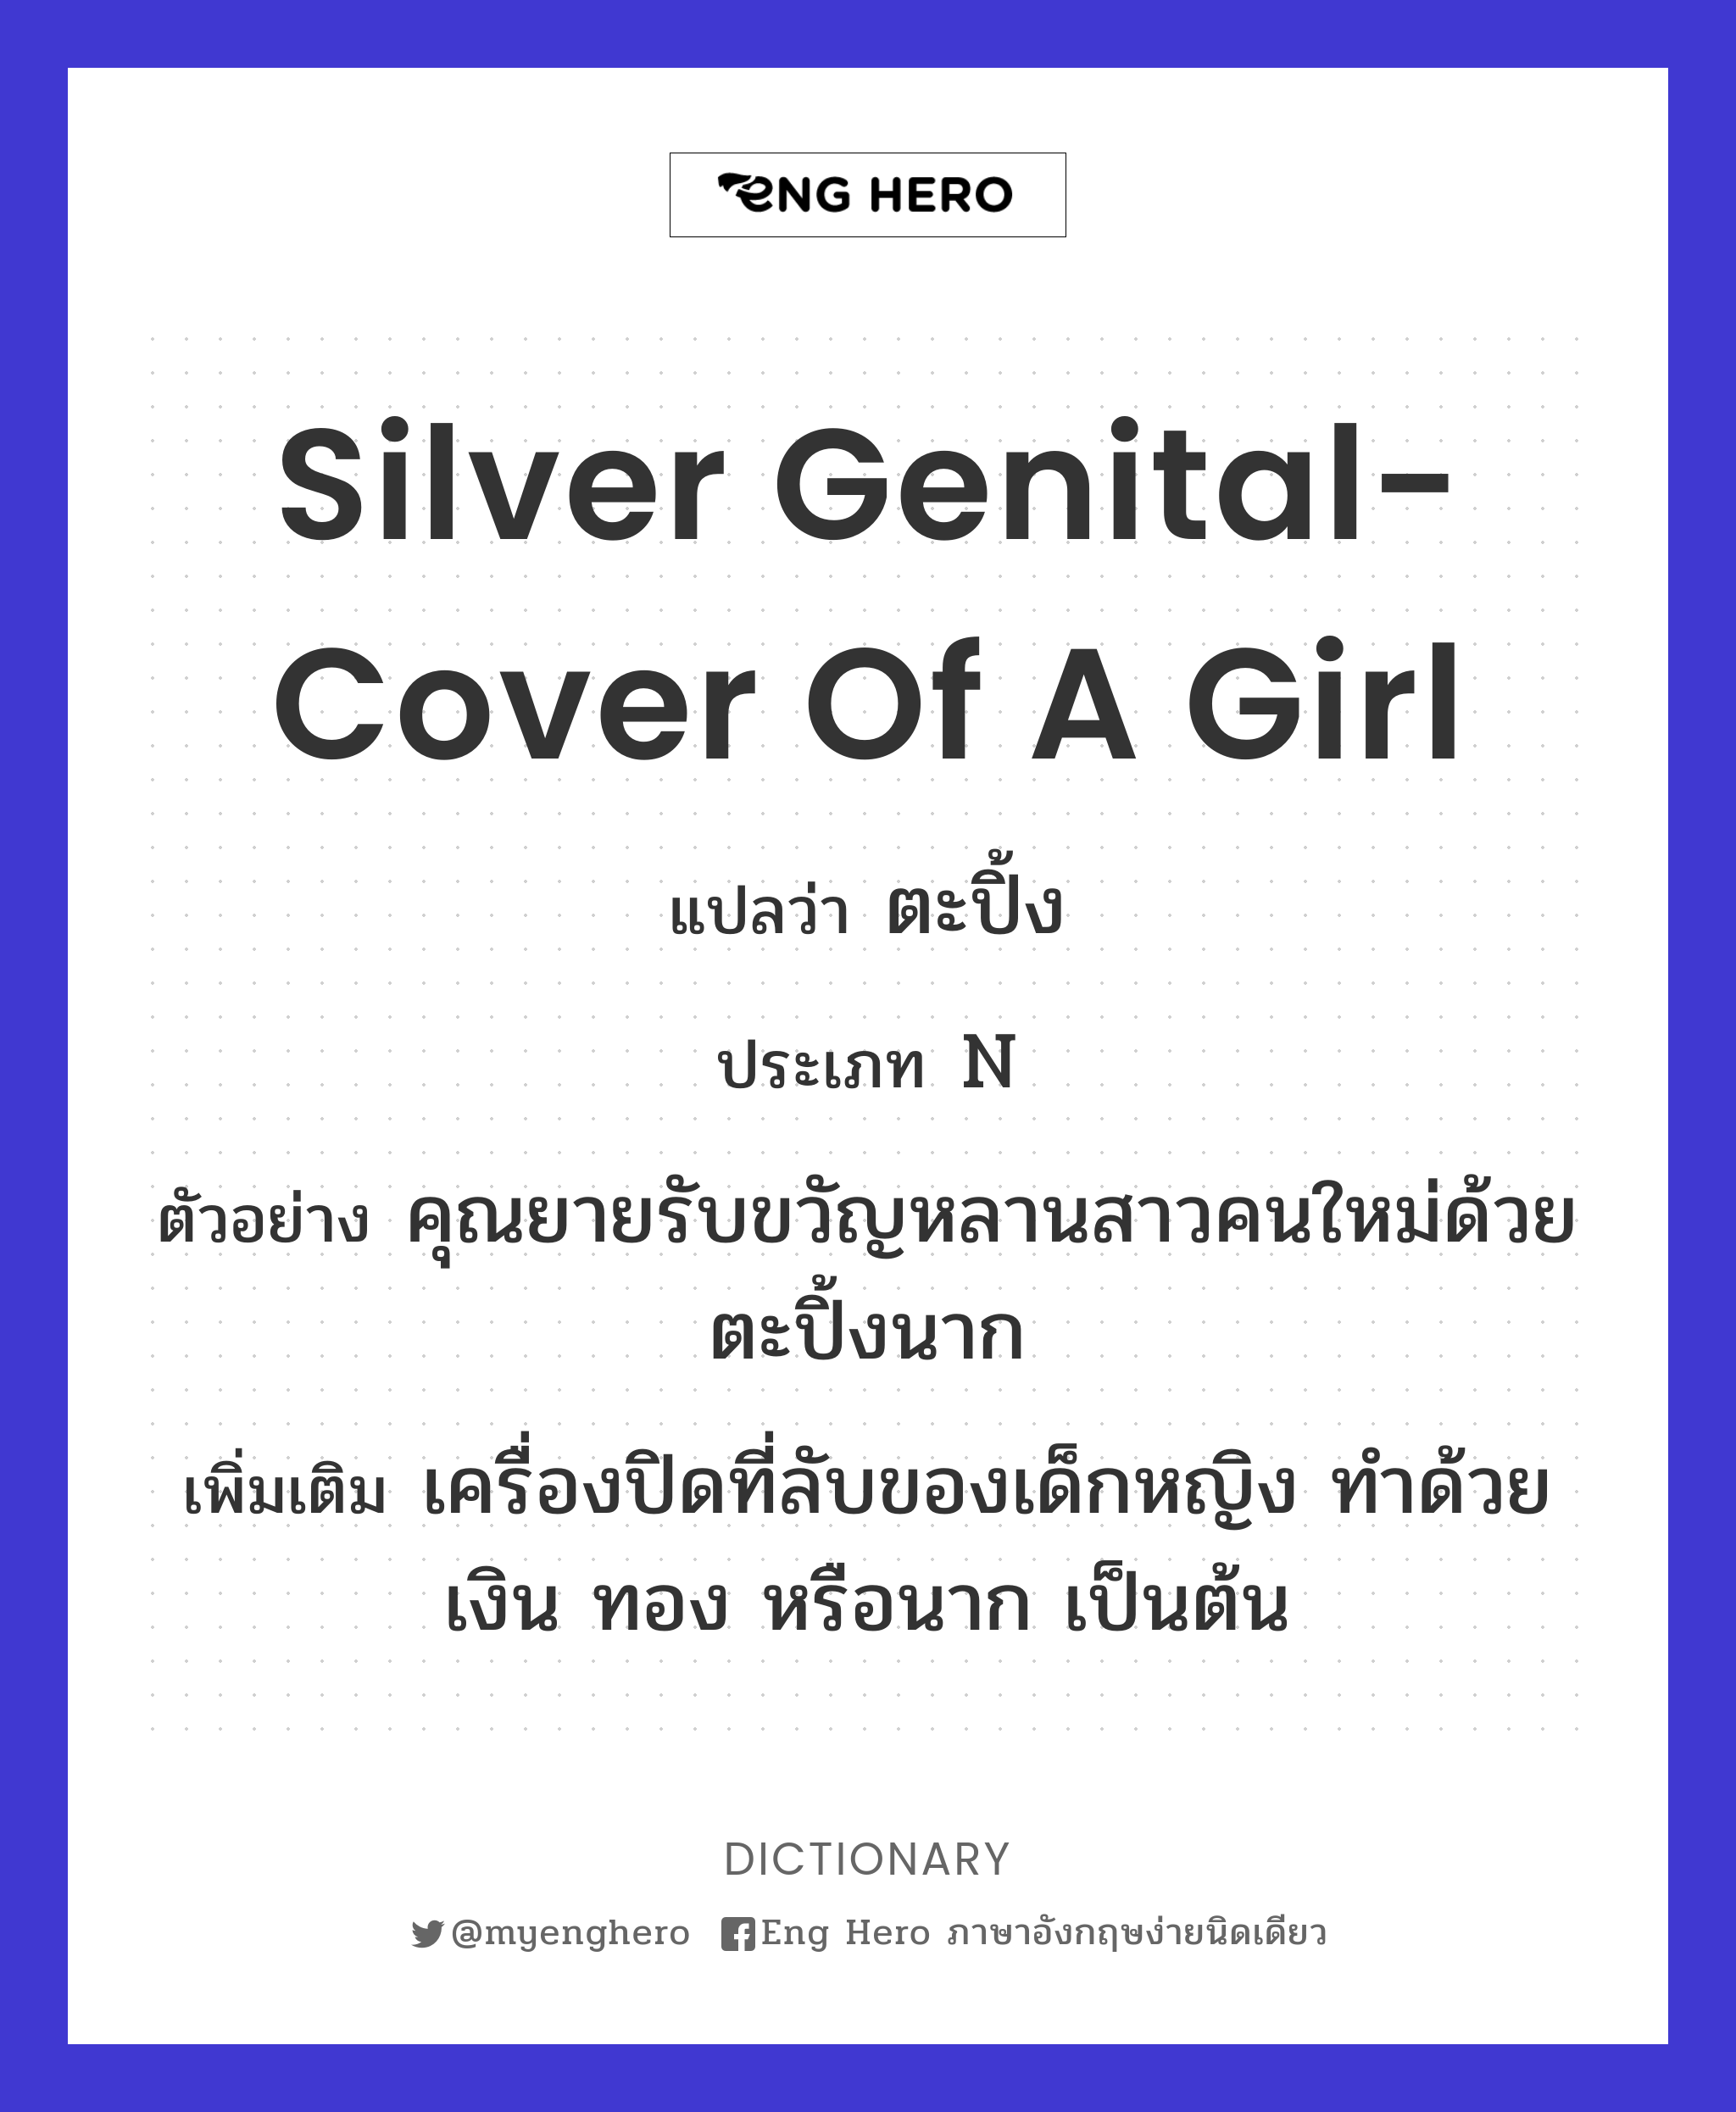 silver genital-cover of a girl